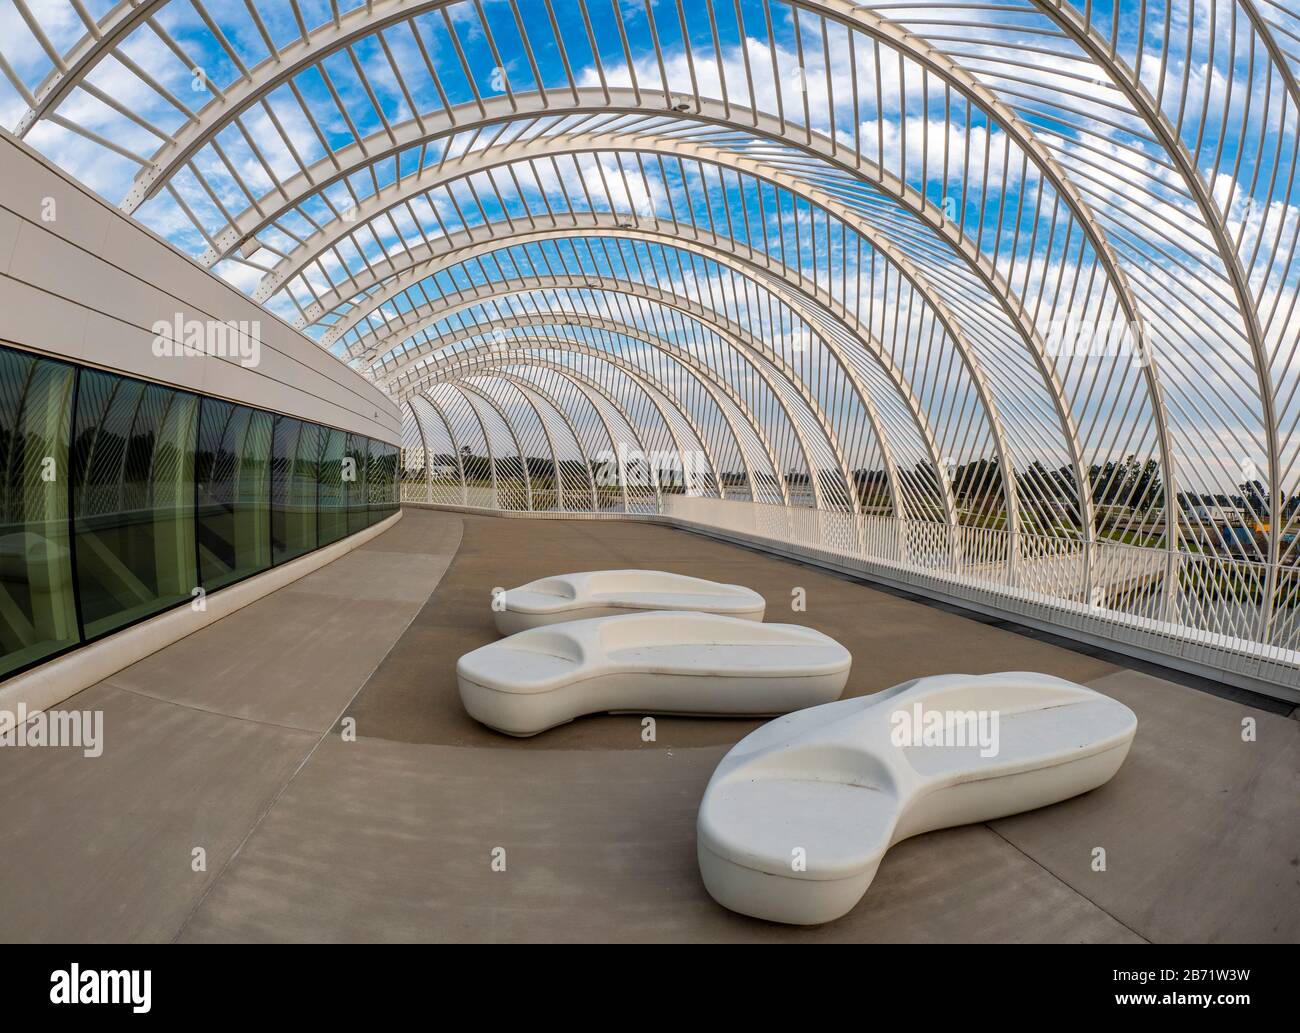 The Innovation, Science and Technology Building, designed by architect Dr. Santiago Calatrava at Florida Polytechnic University in Lakeland Florida Stock Photo